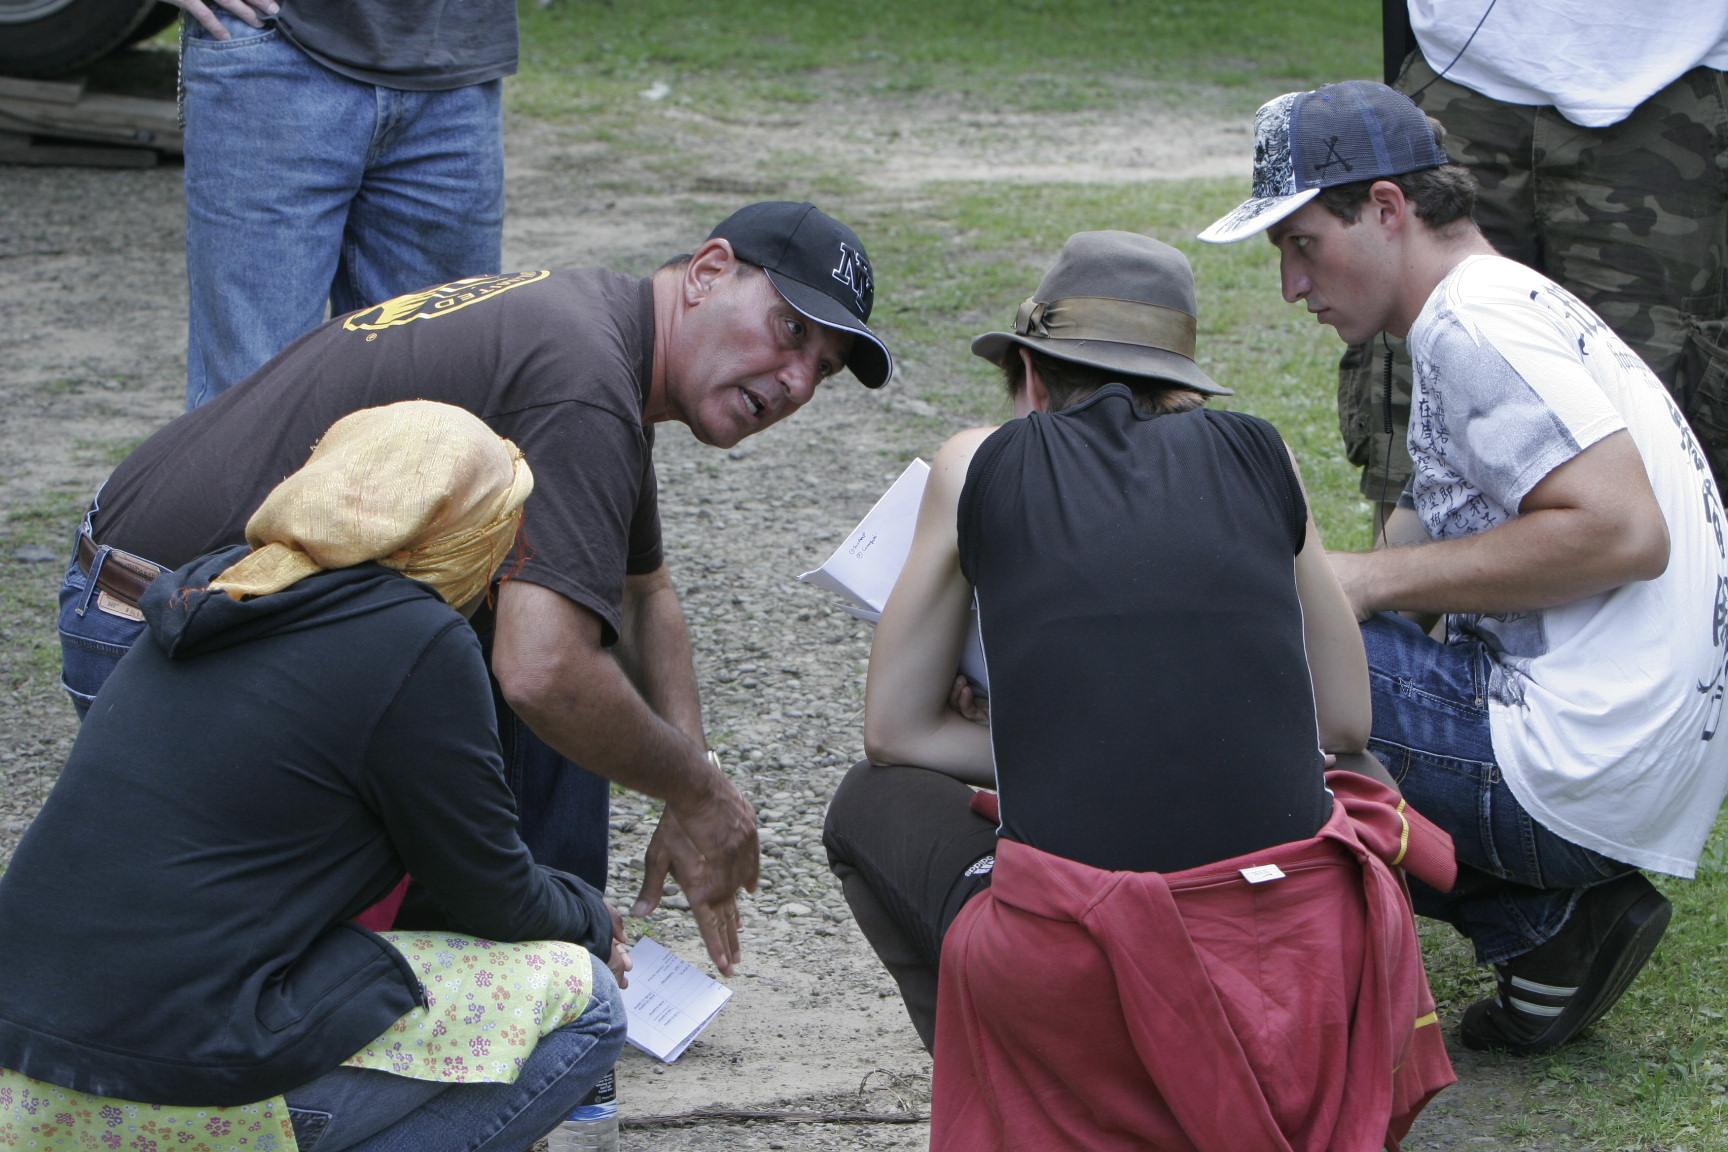 Monica Surrena (center) works with stunt coordinator Justin DeRosa to maximize the impact of the motorcycle race. Also in the photo are Sarah Zerina Usmen (left) and Ryan DeQuintal.